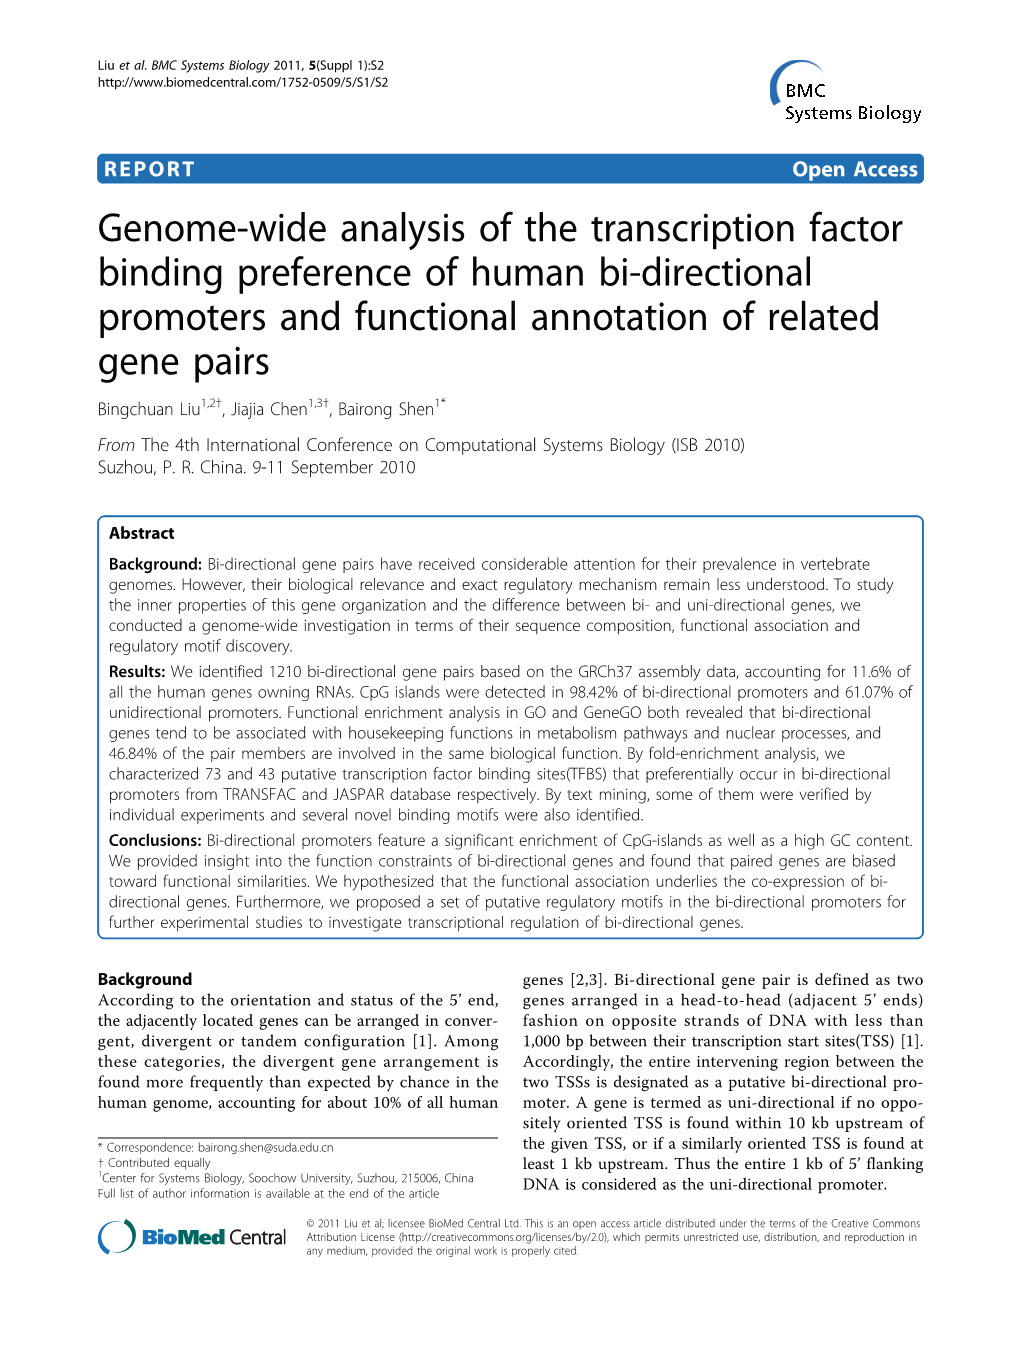 View That Bidirectional Gene Pairs Are of Studying a Single Gene, a Genome-Wide Analysis of Prevalent in the Human Genome